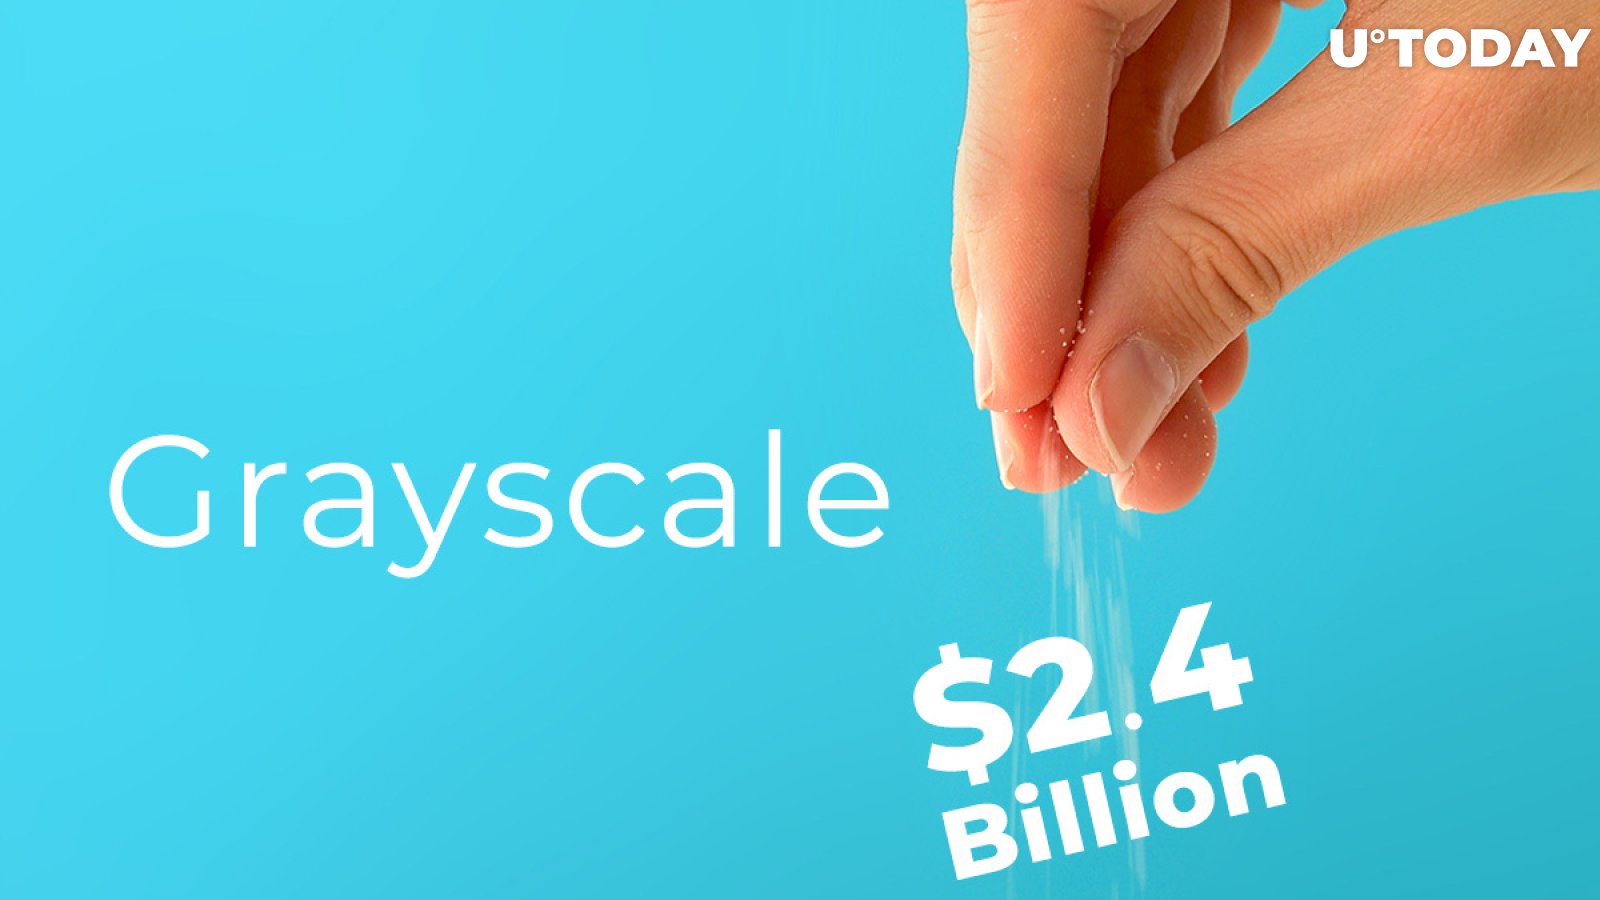 Grayscale Adds $2.4 Billion Worth of Crypto in Three Days